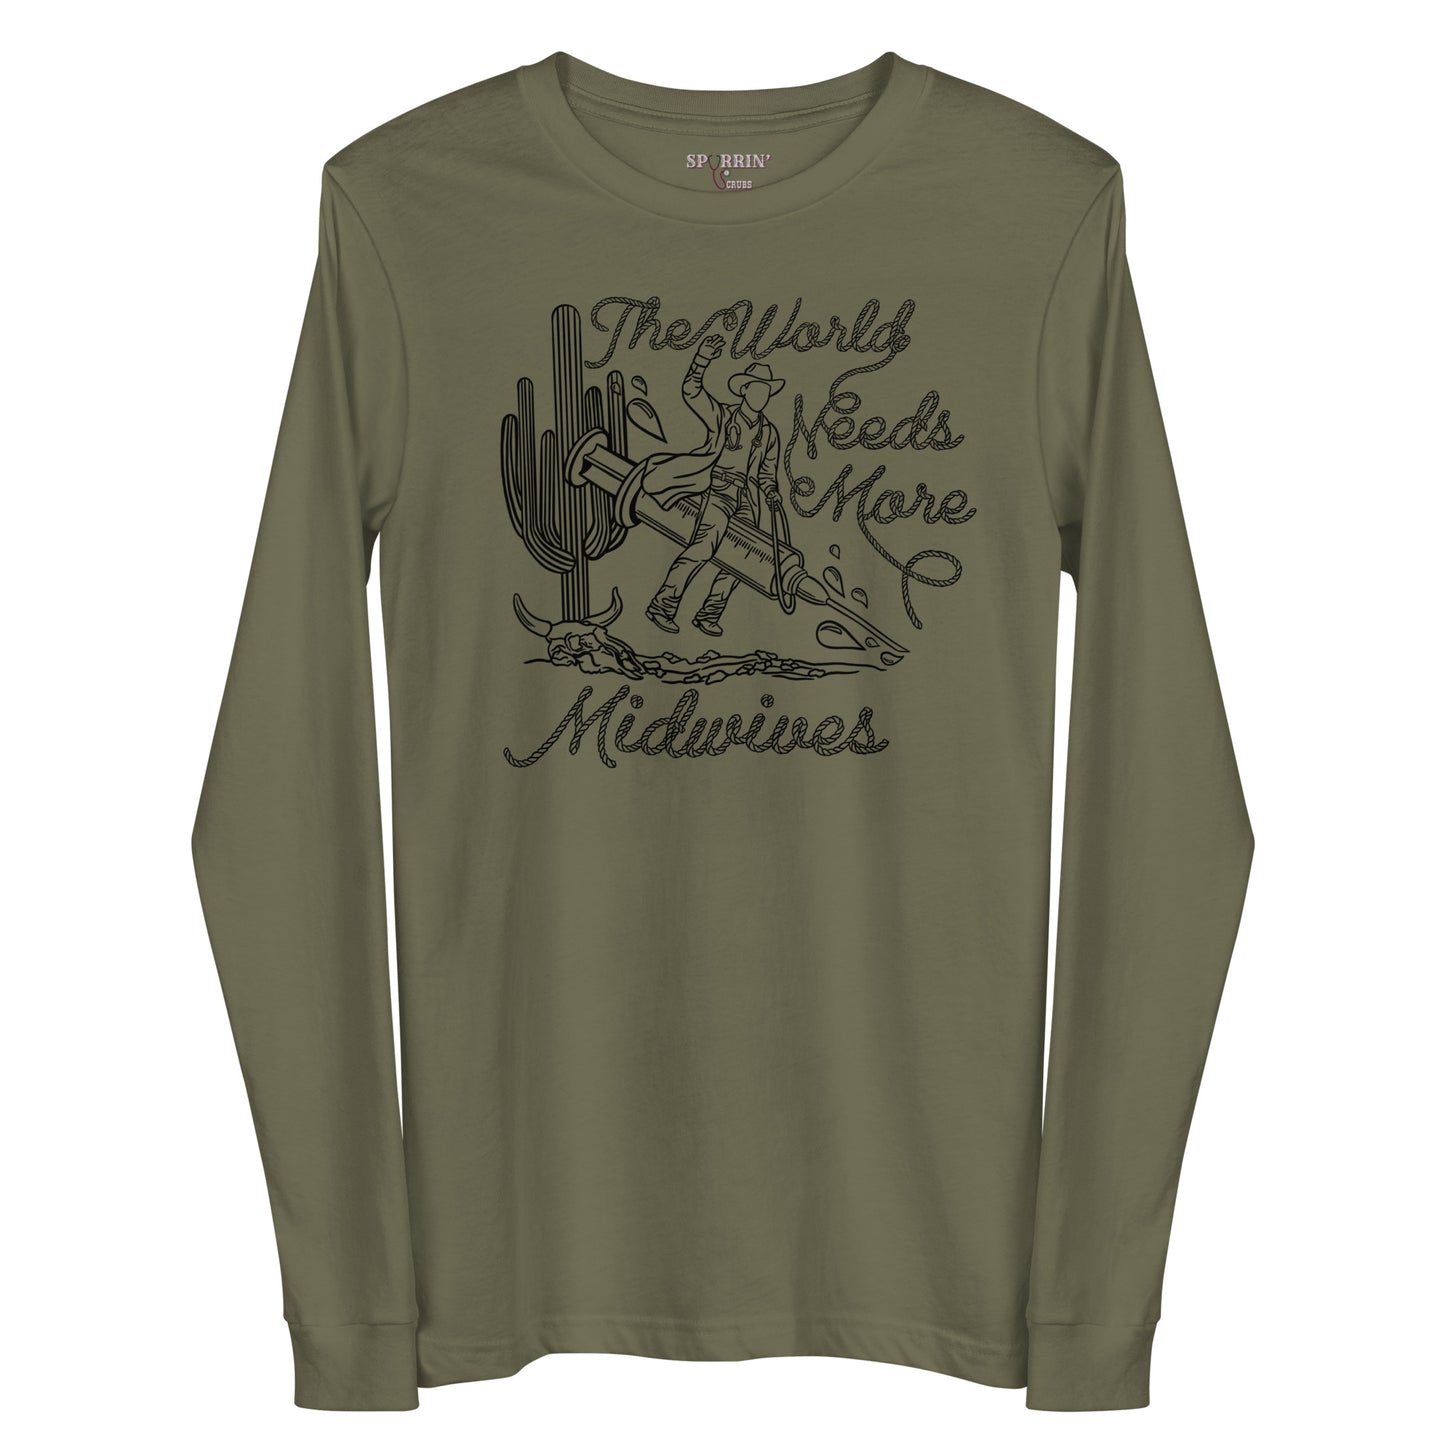 TWNM-Midwives Long Sleeve T-Shirt Light Colors